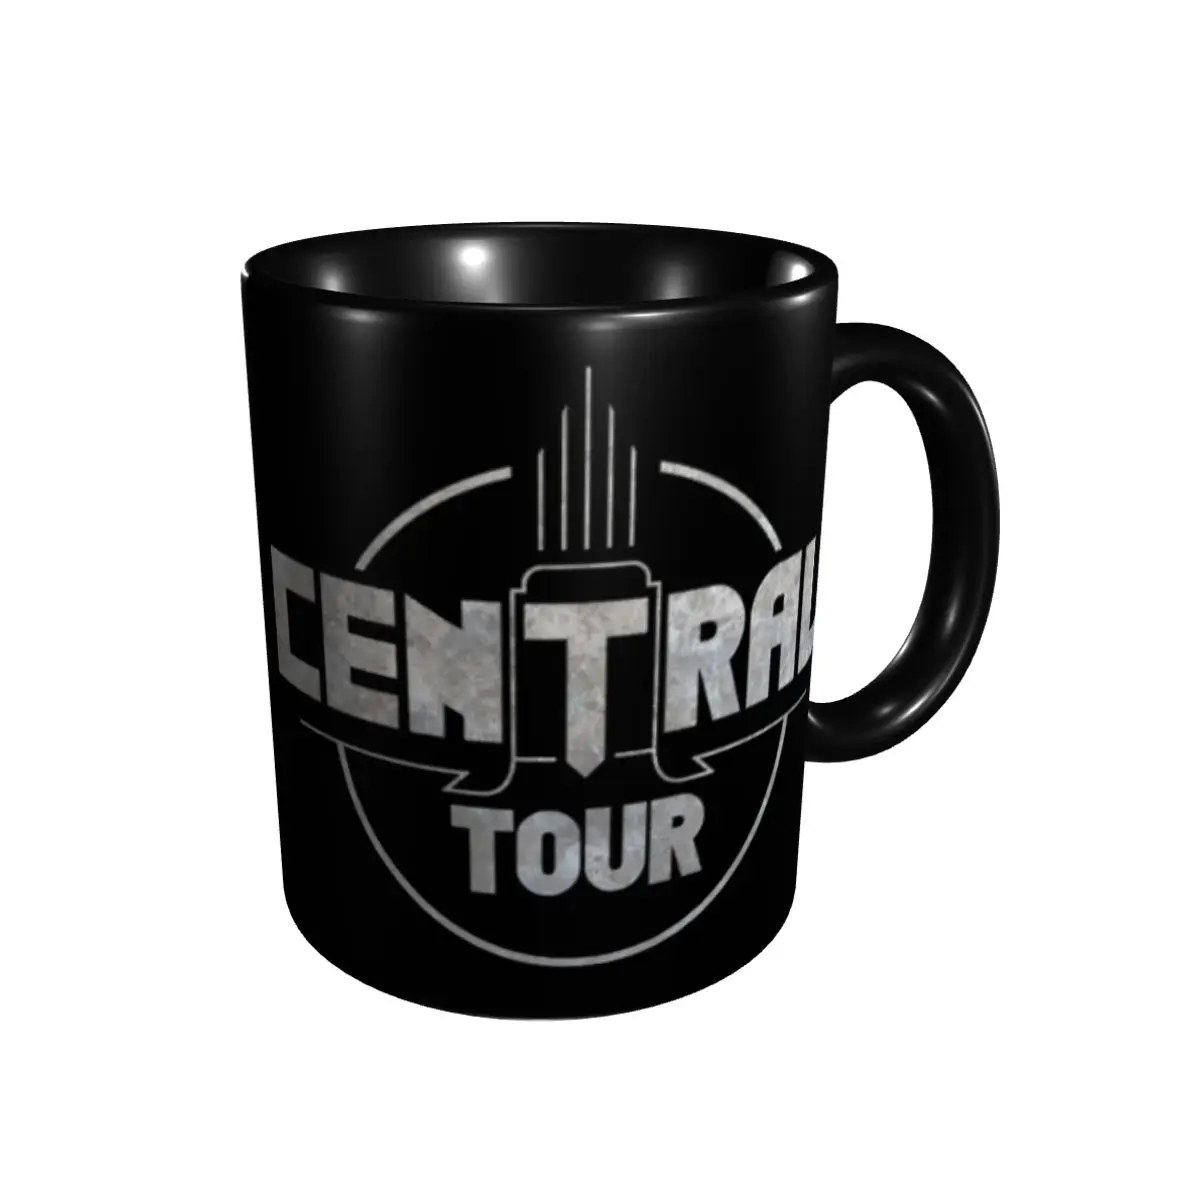 

Promo Best Seller INDOCHINE CENTRAL TOUR Design Mugs Classic Cups Mugs Print Funny Novelty band milk cups